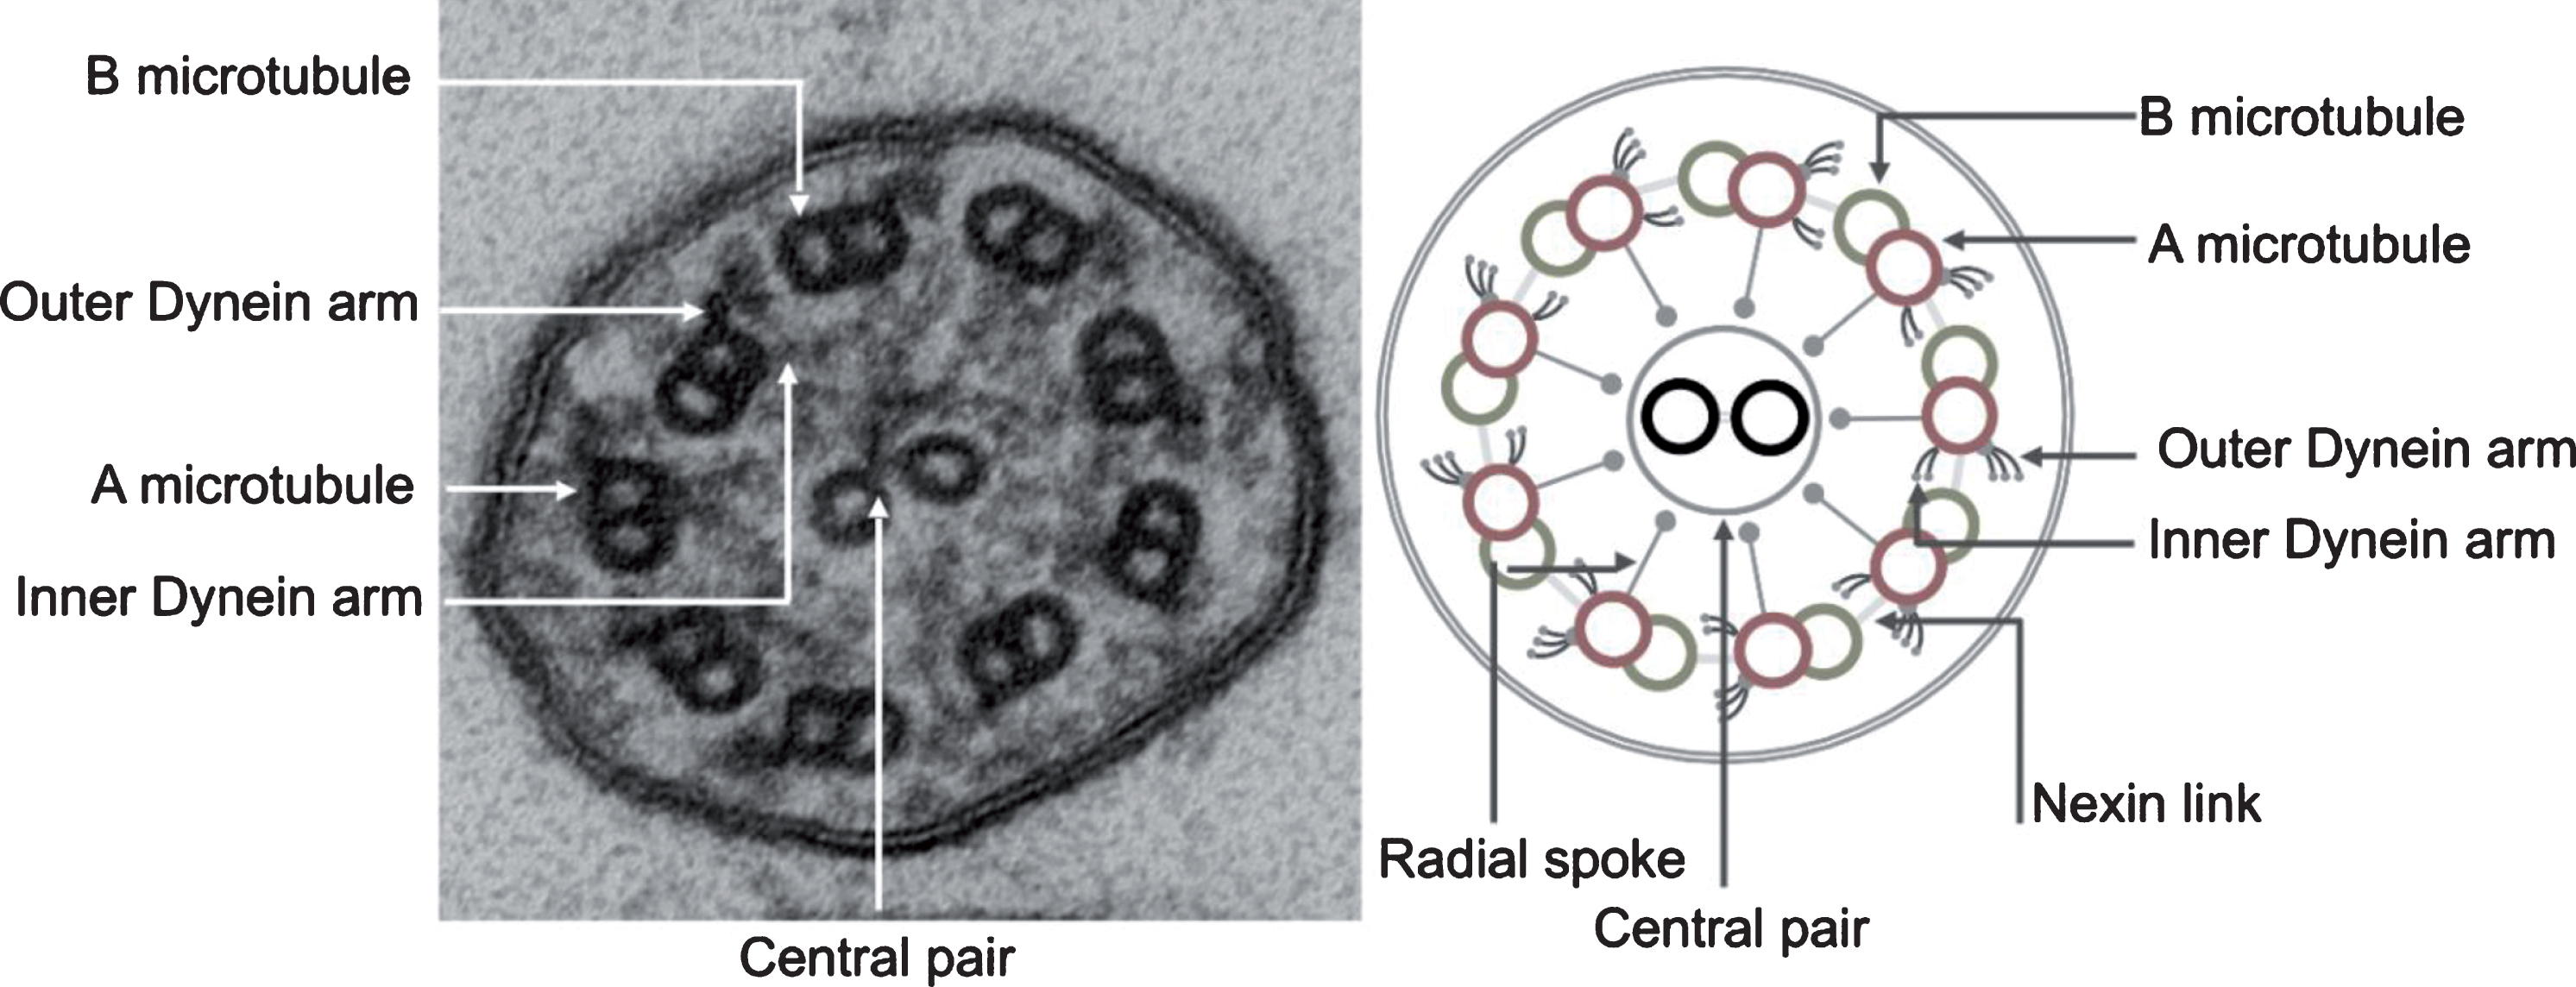 Transmission electron photomicrograph (left) and schematic diagram (right) of a normal motor cilium in cross-section showing the ultrastructural features of the ciliary axoneme.